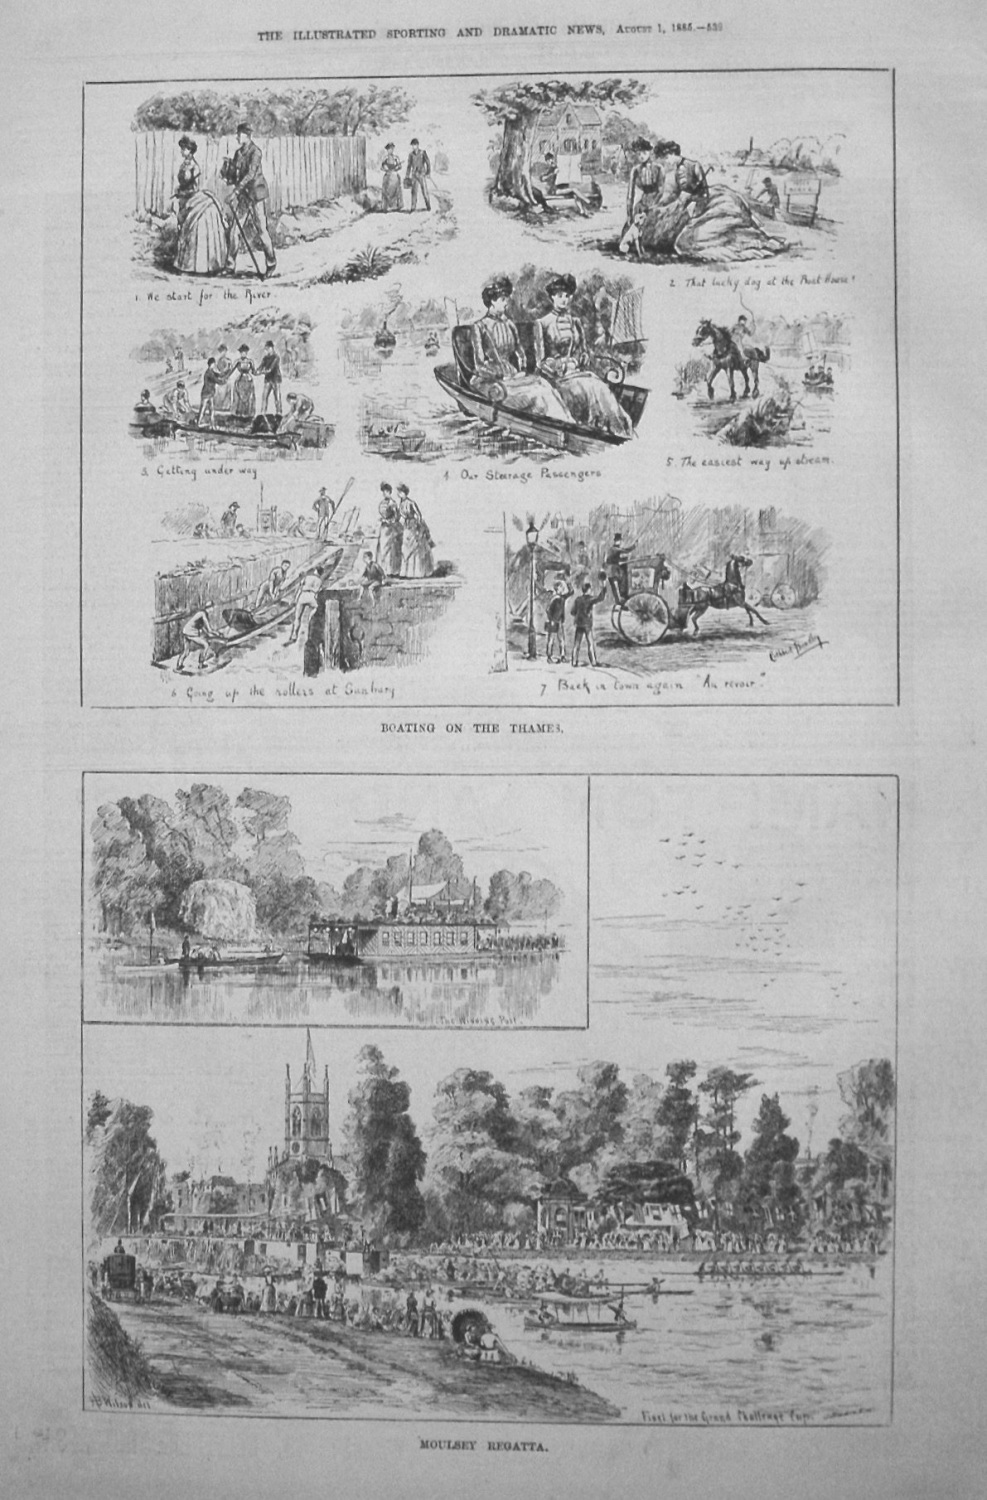 Mousey Regatta. and Boating on the Thames.  1885